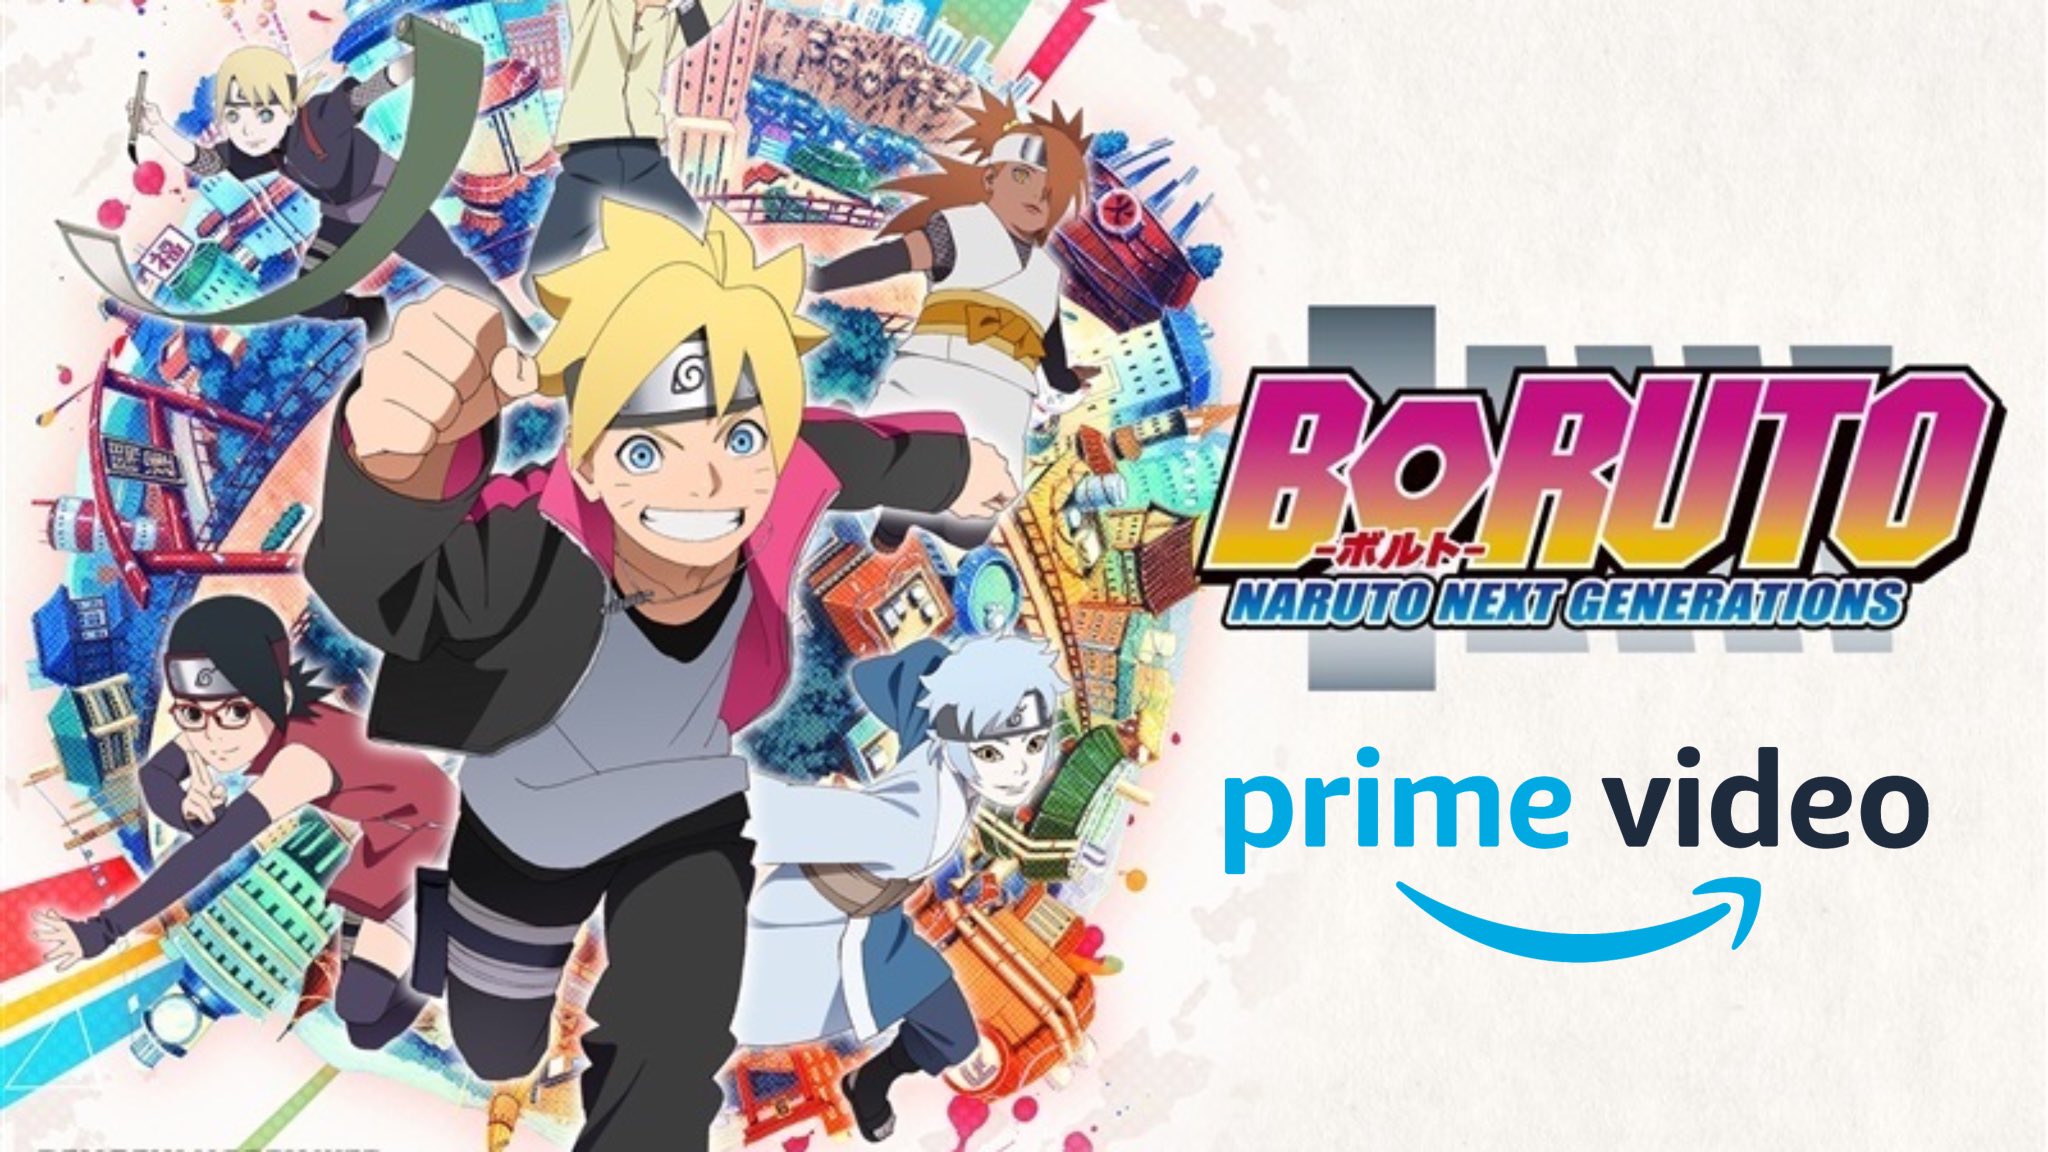 tilstrækkelig forråde omdømme Abdul Zoldyck on Twitter: "Starting from September 10th, Boruto: Naruto  Next Generations, NARUTO (HD), &amp; Naruto Shippuden will be added to  Amazon Prime Video, exclusively in Japan. For more information;  https://t.co/P4gyBzPj28 https://t.co ...